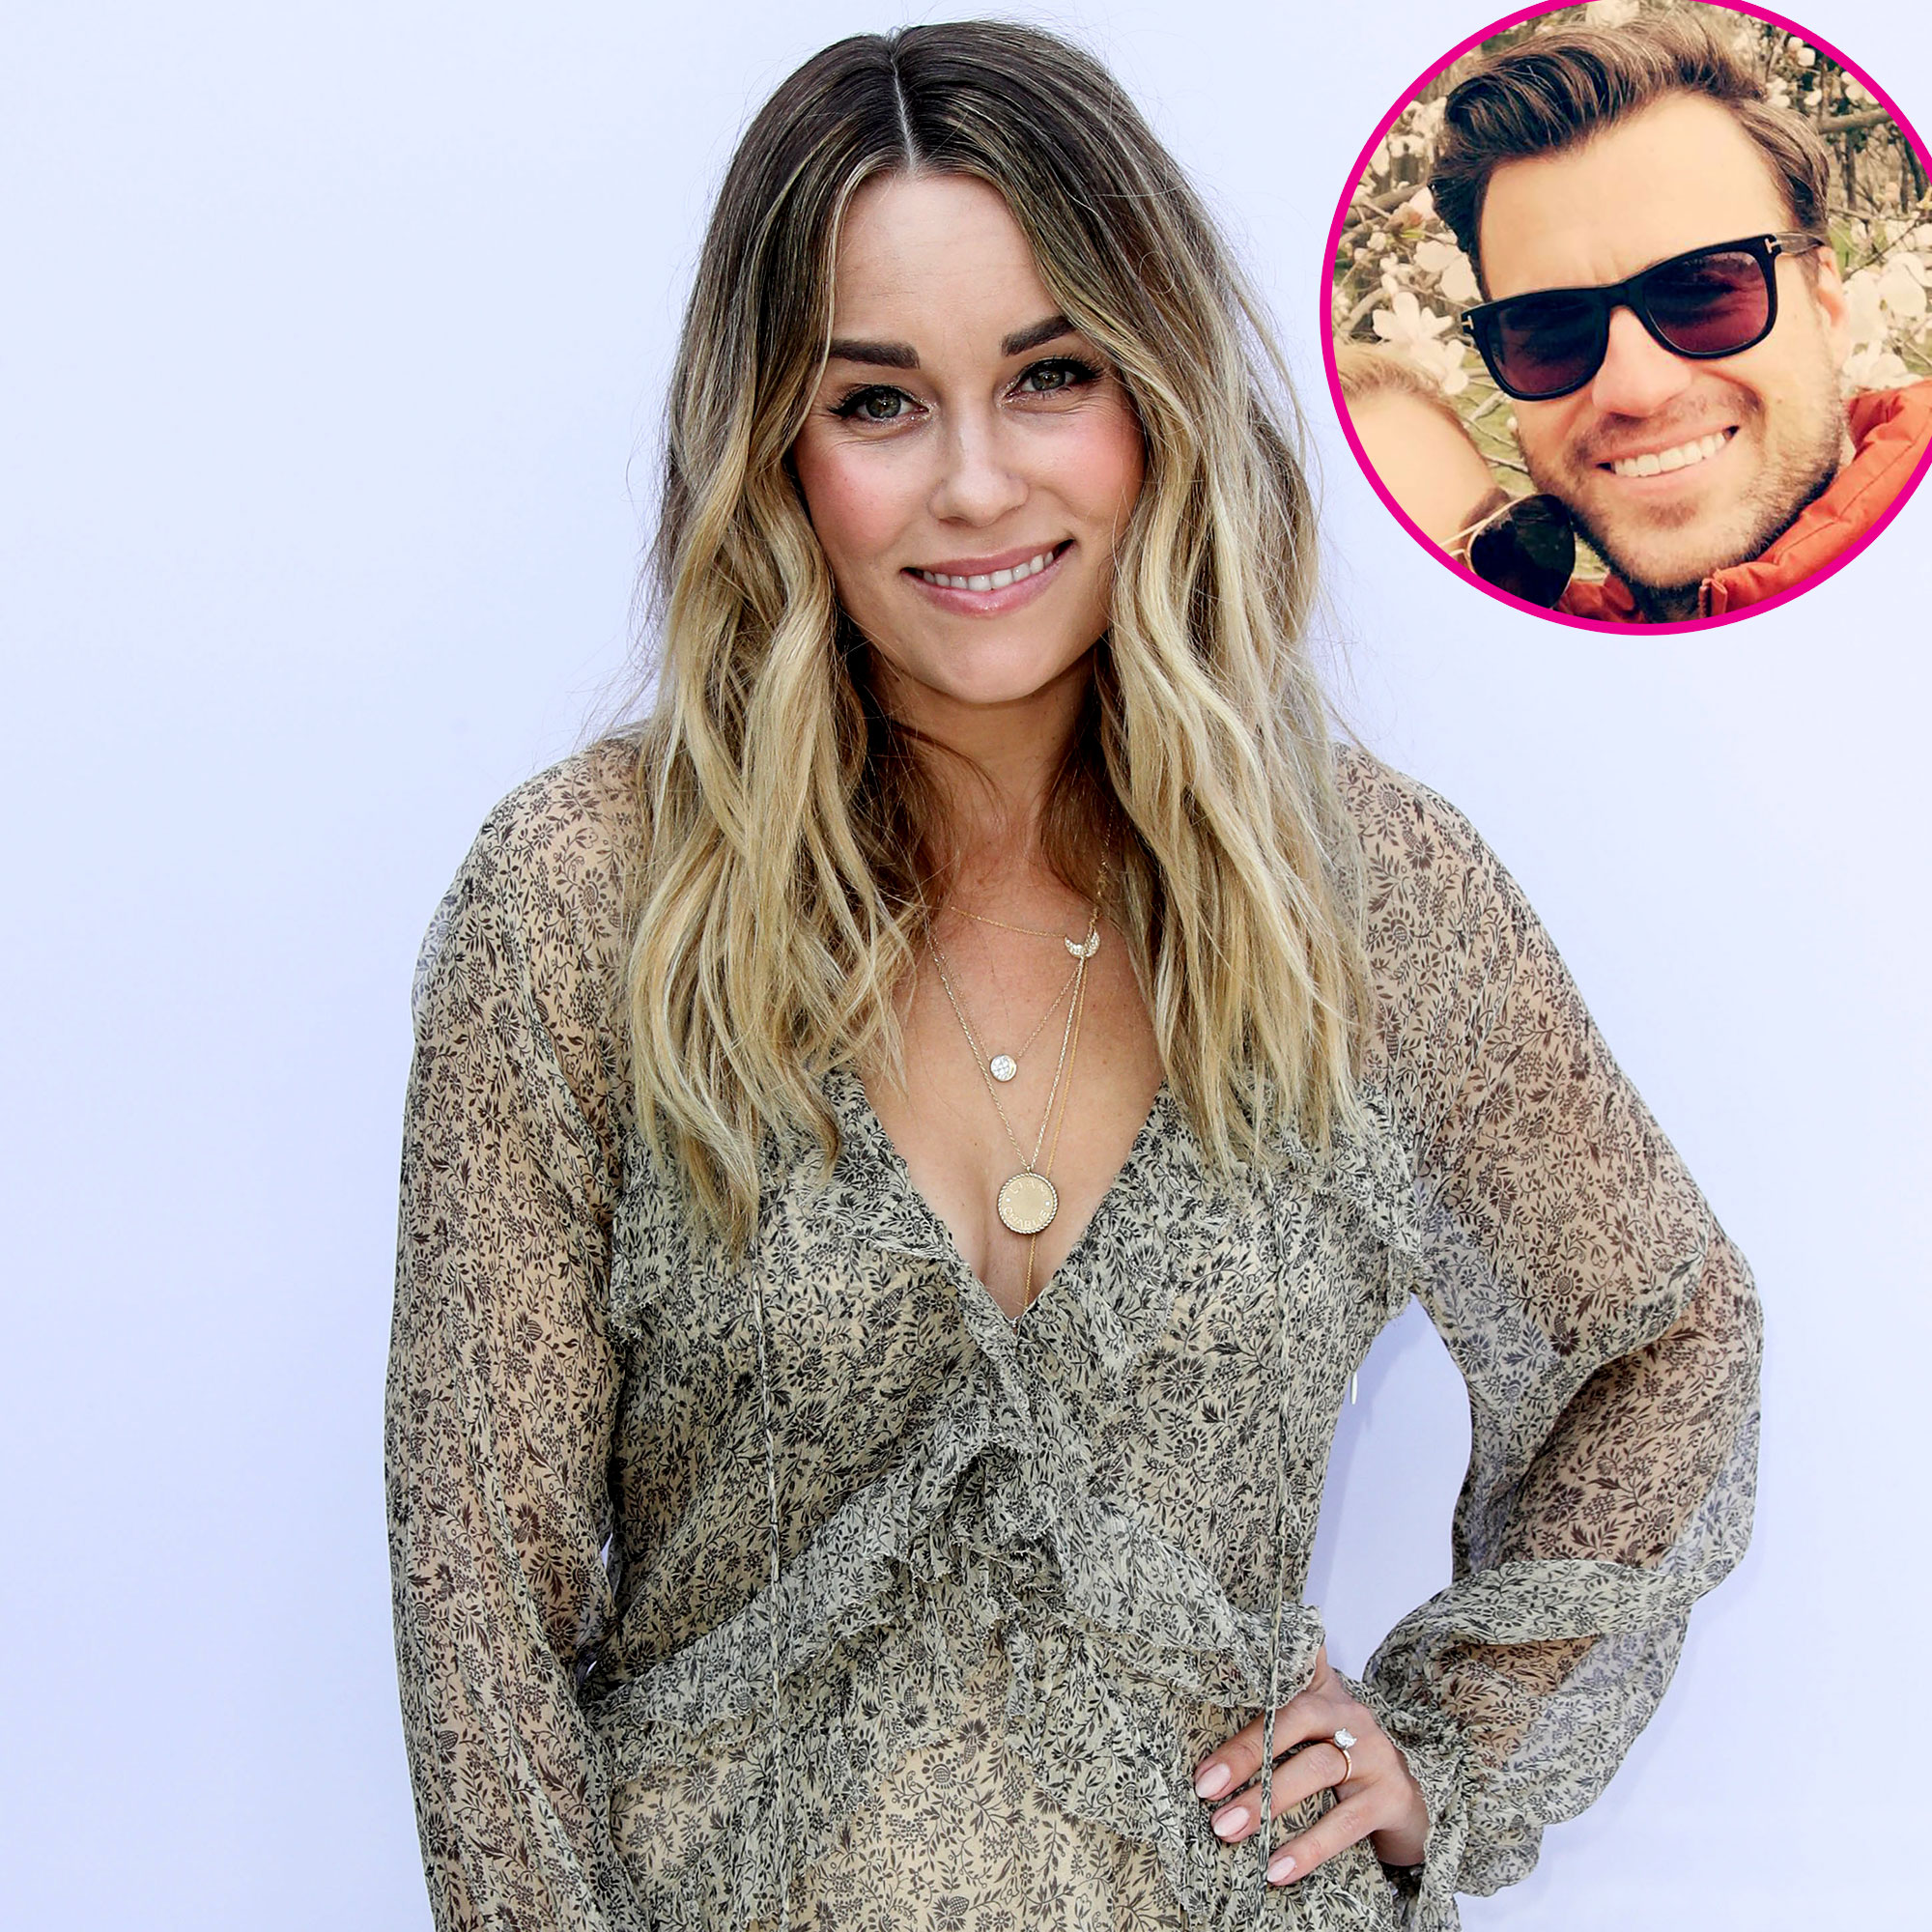 Lauren Conrad candids also shares what's in her bag.